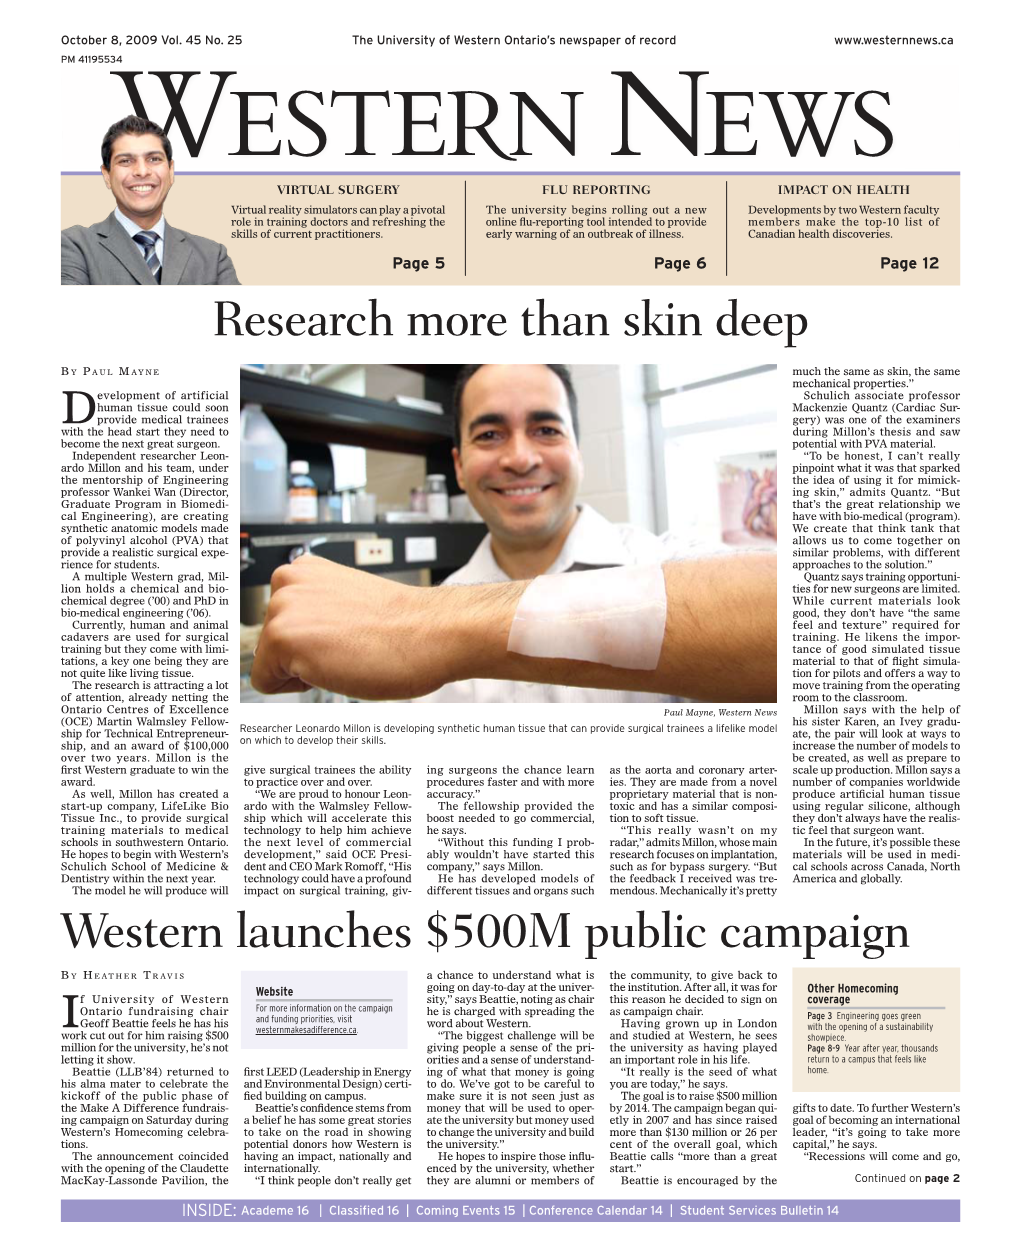 Research More Than Skin Deep Western Launches $500M Public